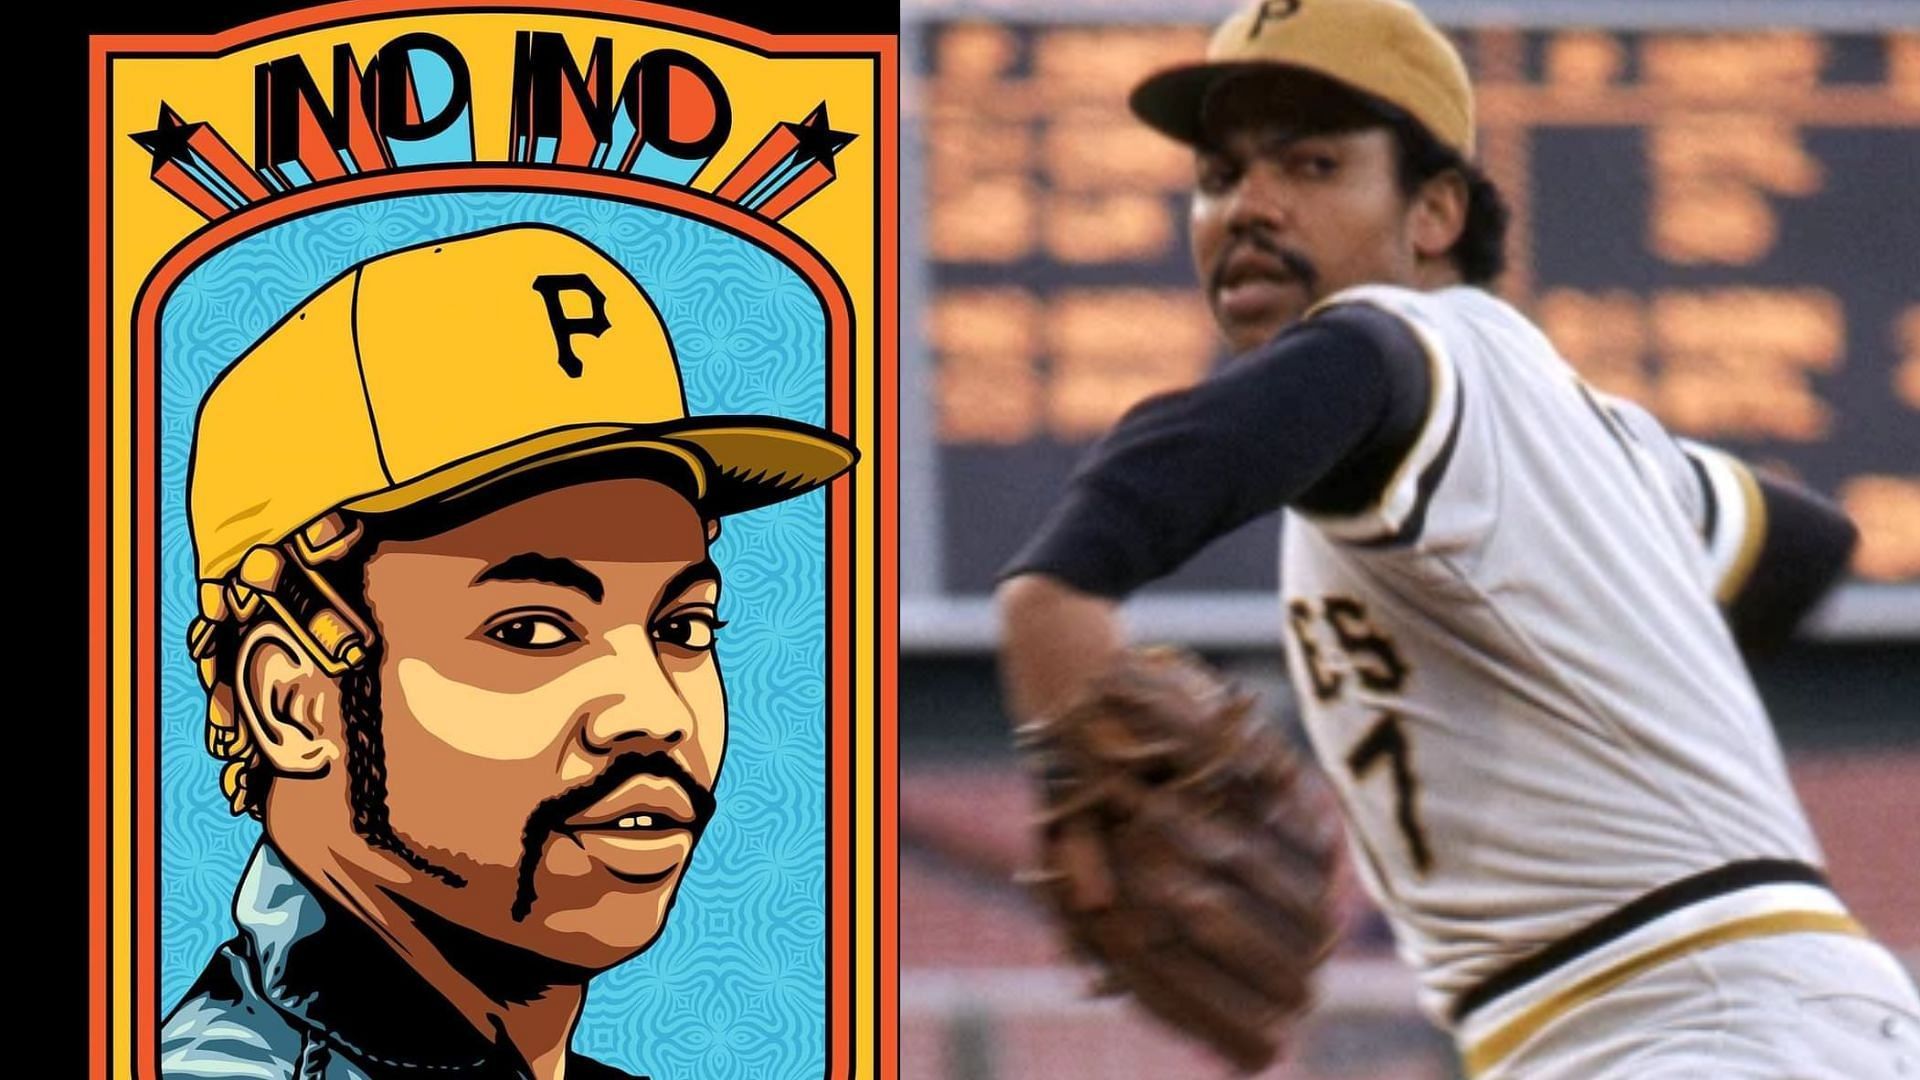 No No: A Dockumentary' Looks at Dock Ellis - The New York Times